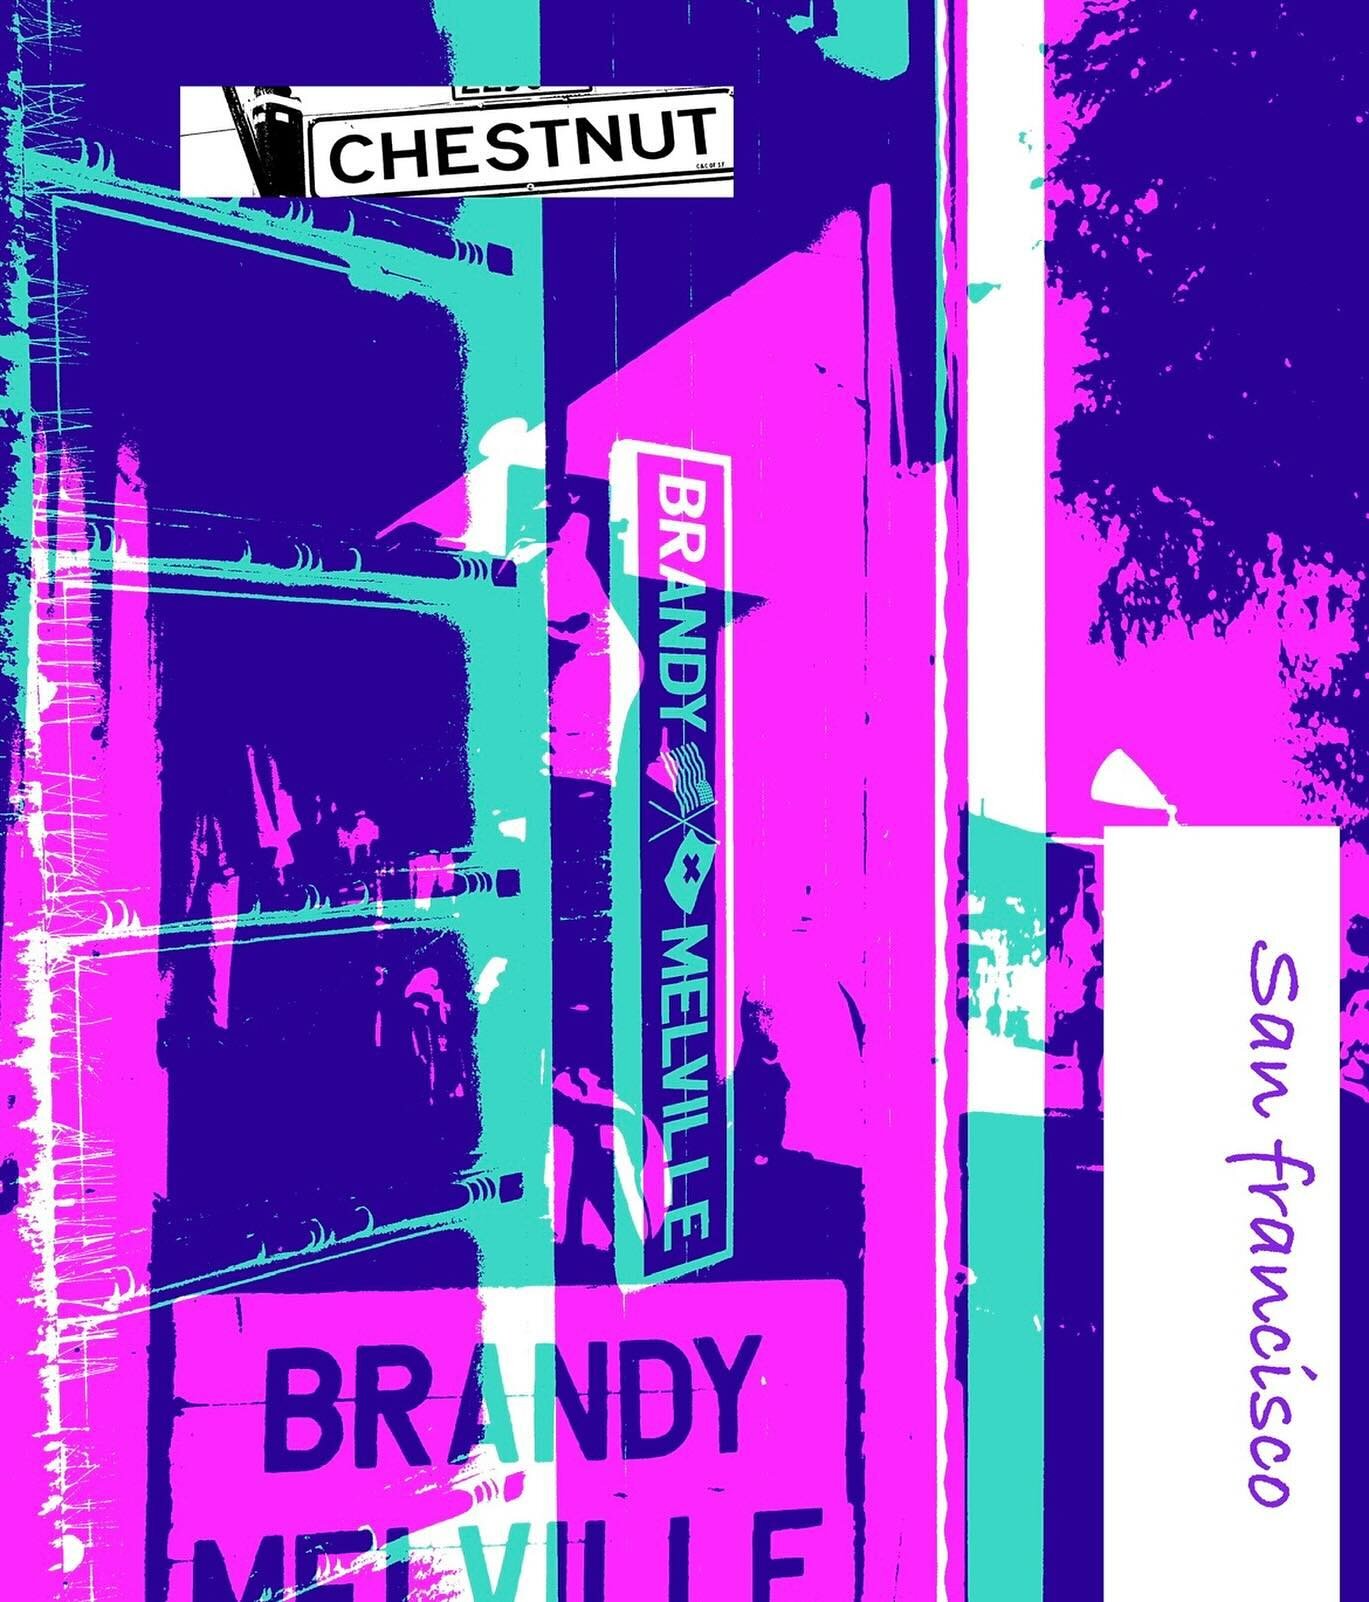 Check out my Chestnut St photo prints @photographandframesf Brandy Melville,Peet&rsquo;s, Lucca, Tipsy Pig , Horseshoe and more iconic Marina faves 💞customize with frames 
#chestnutst 
#sanfranciscophotos 
#marinasanfrancisco 
#localbusiness